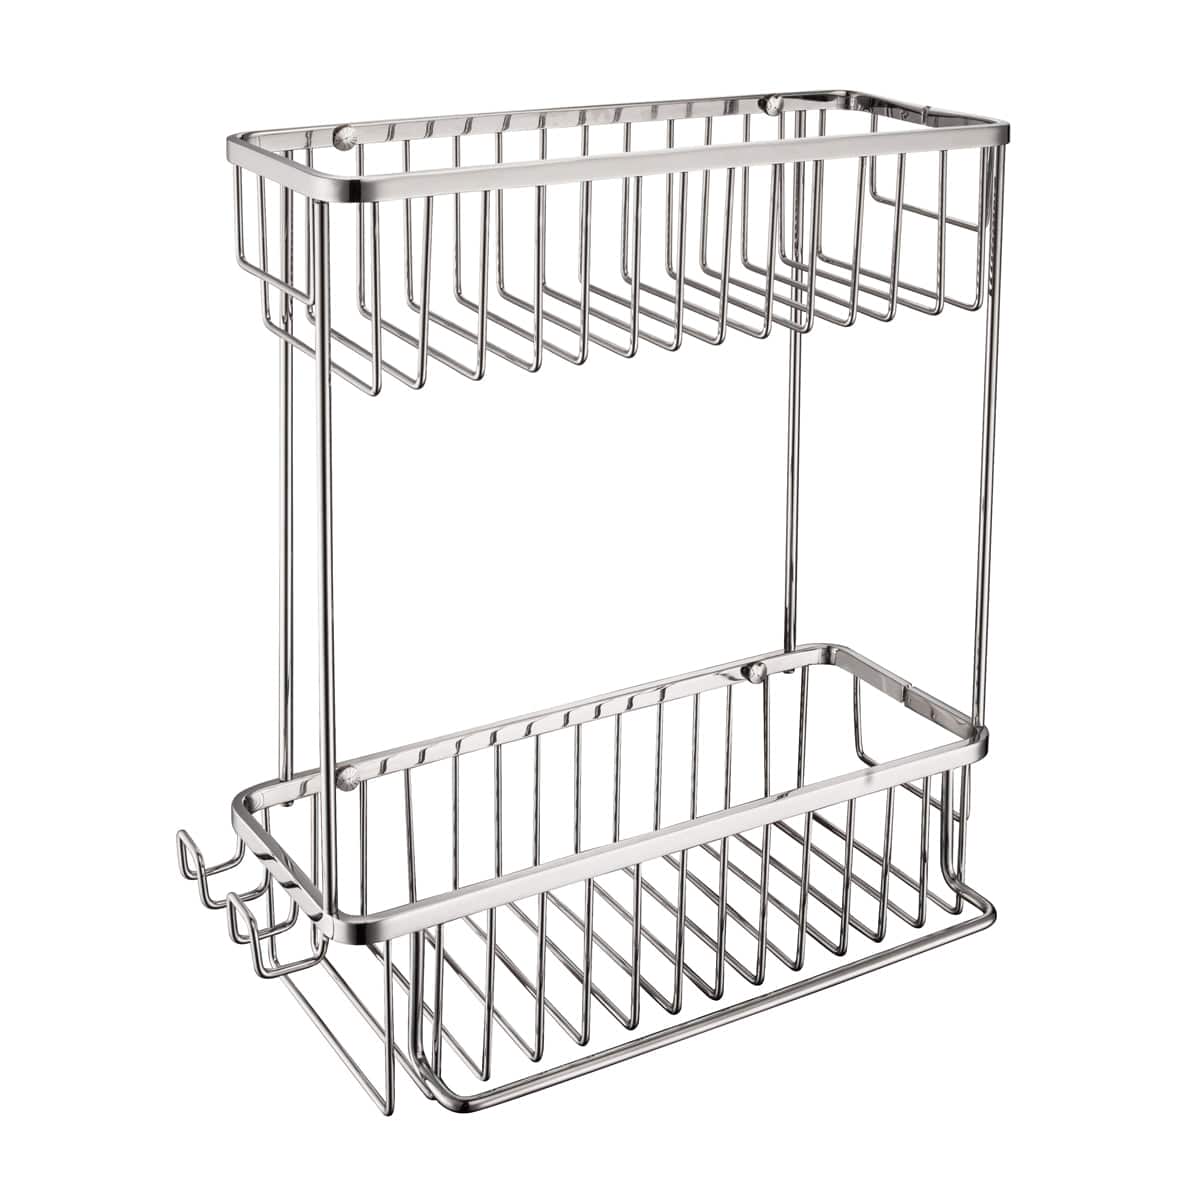 Shop Bathroom Stainless Steel Chrome Corner 2 Tier Shower Caddy Basket with Hooks - 108H | Buy Online at Supply Master Accra, Ghana Bathroom Accessories Buy Tools hardware Building materials